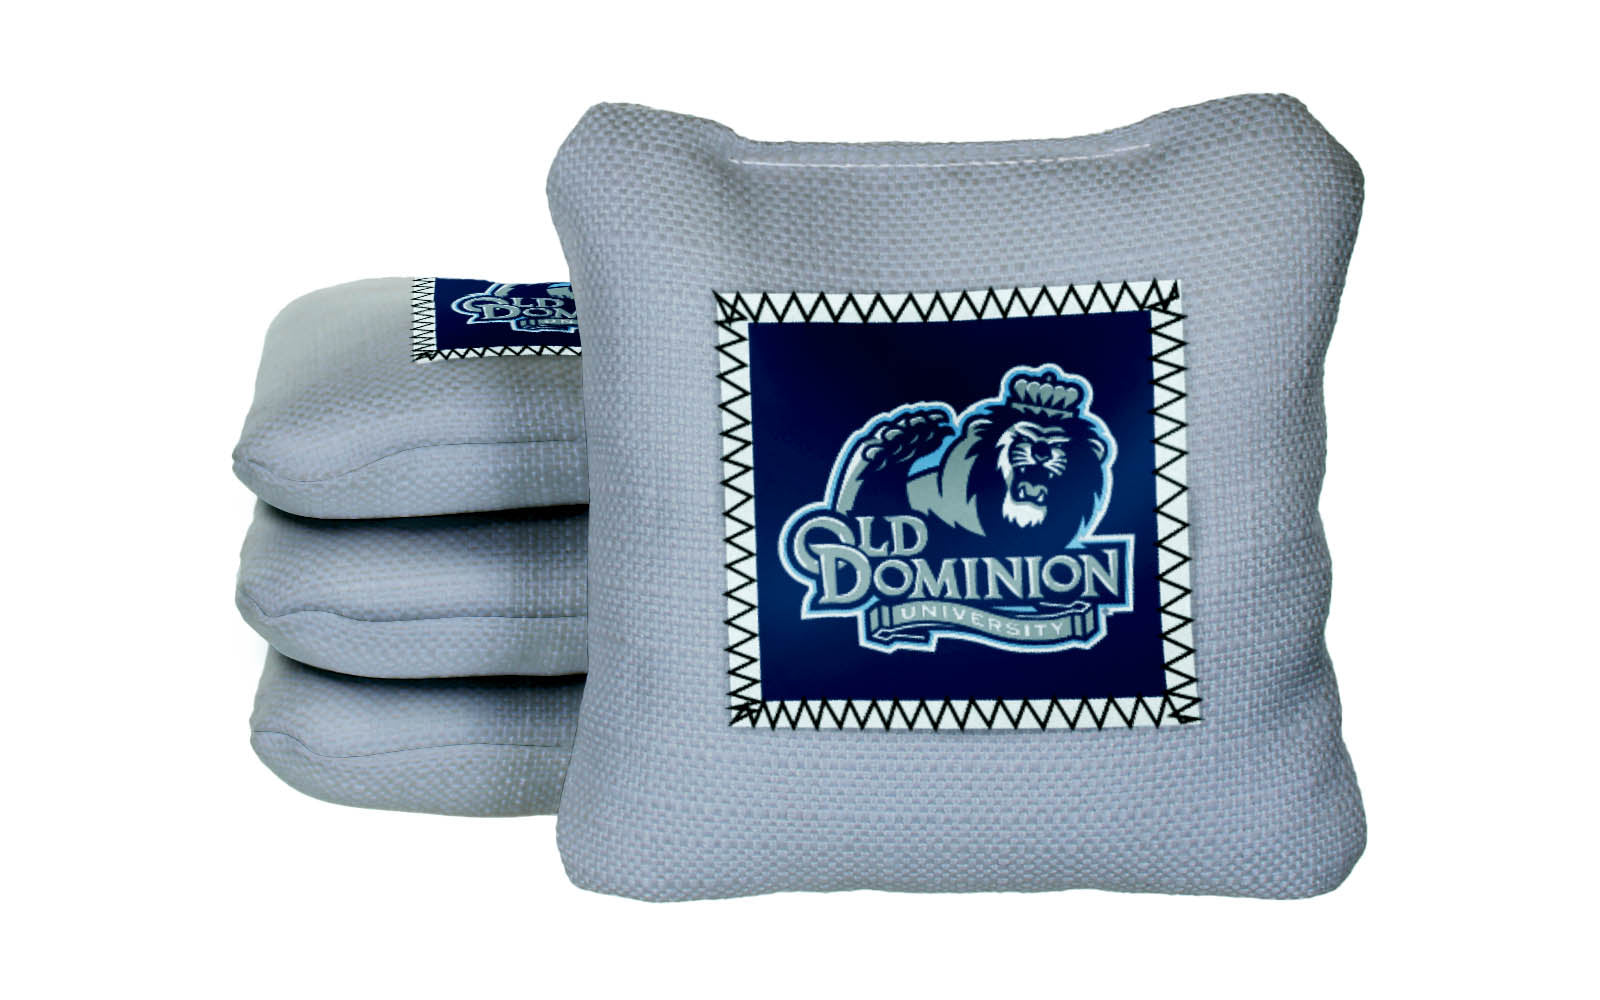 Officially Licensed Collegiate Cornhole Bags - AllCornhole Game Changers Steady 2.0 - Set of 4 - Old Dominion University